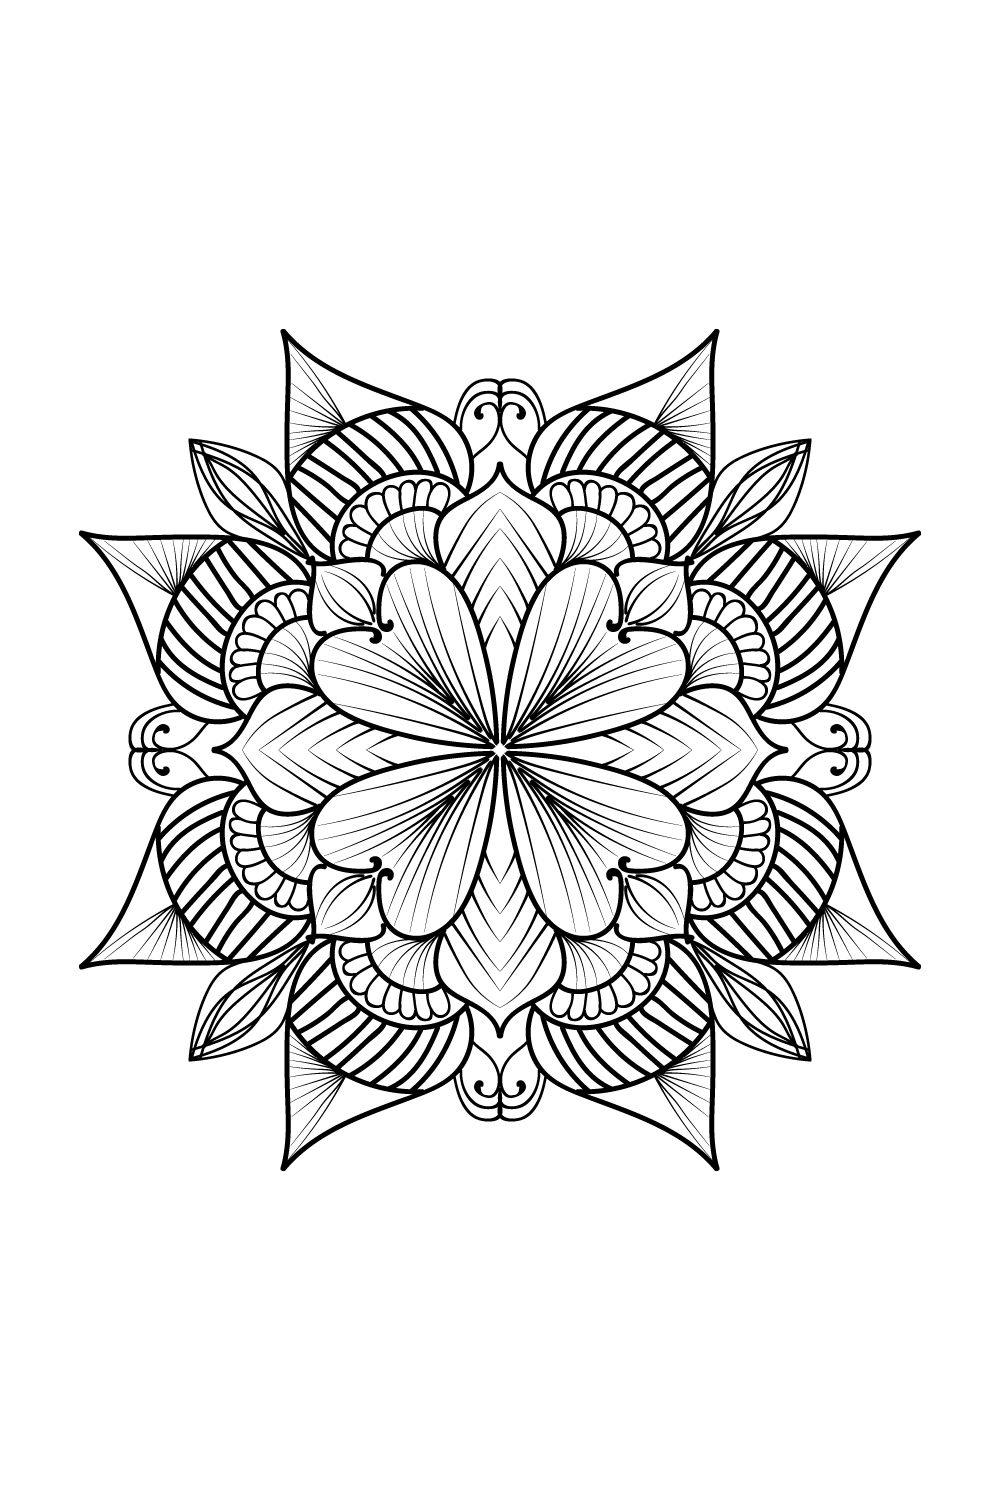 mandala art, mandala art designs, mandala art designs colorful